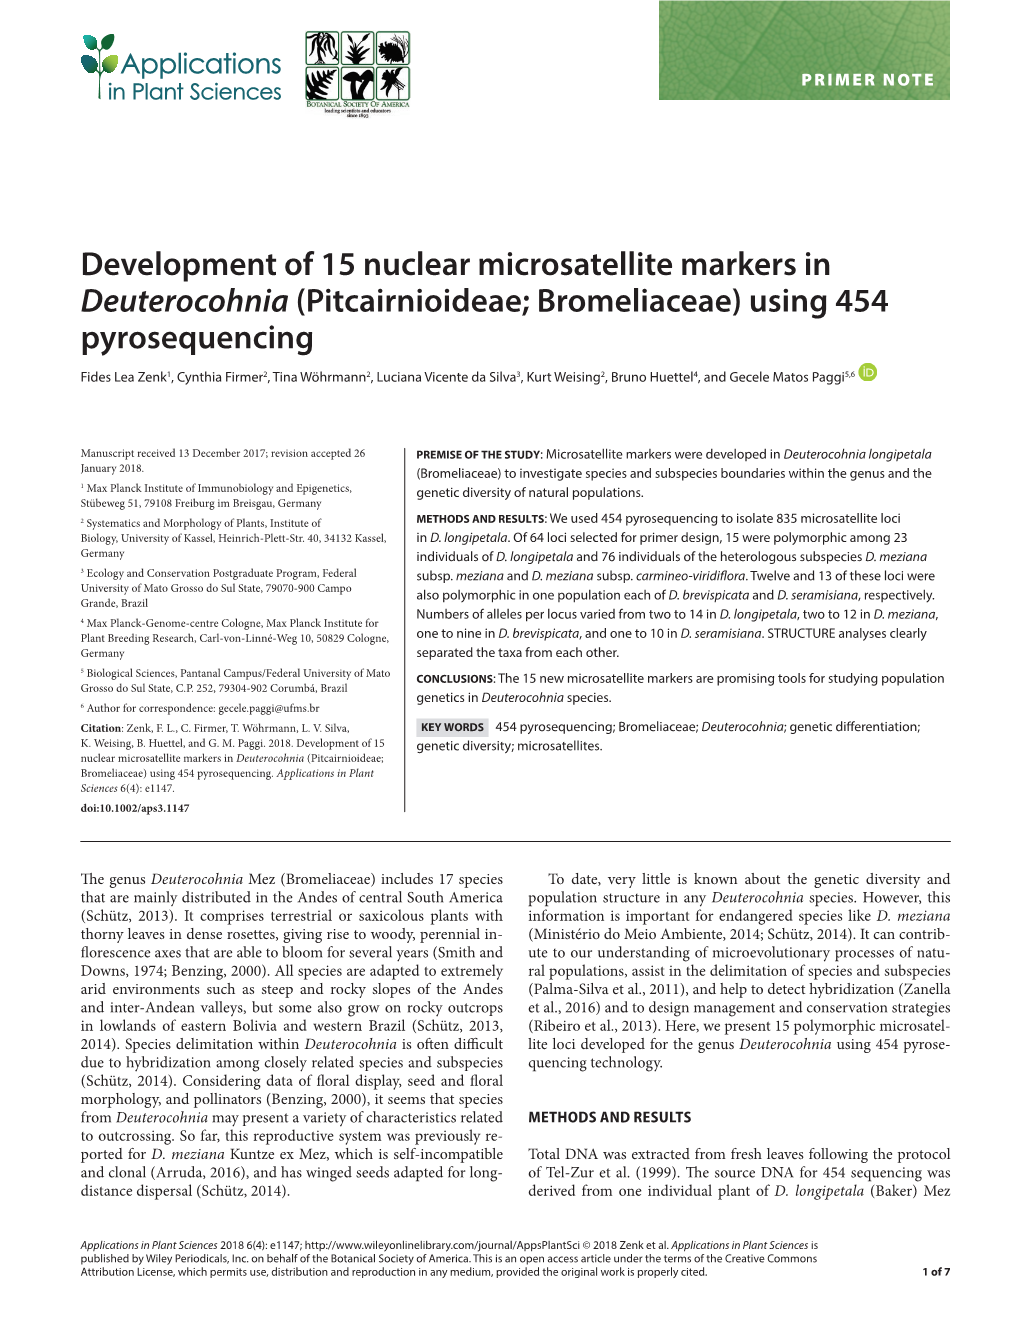 Development of 15 Nuclear Microsatellite Markers in Deuterocohnia (Pitcairnioideae; Bromeliaceae) Using 454 Pyrosequencing